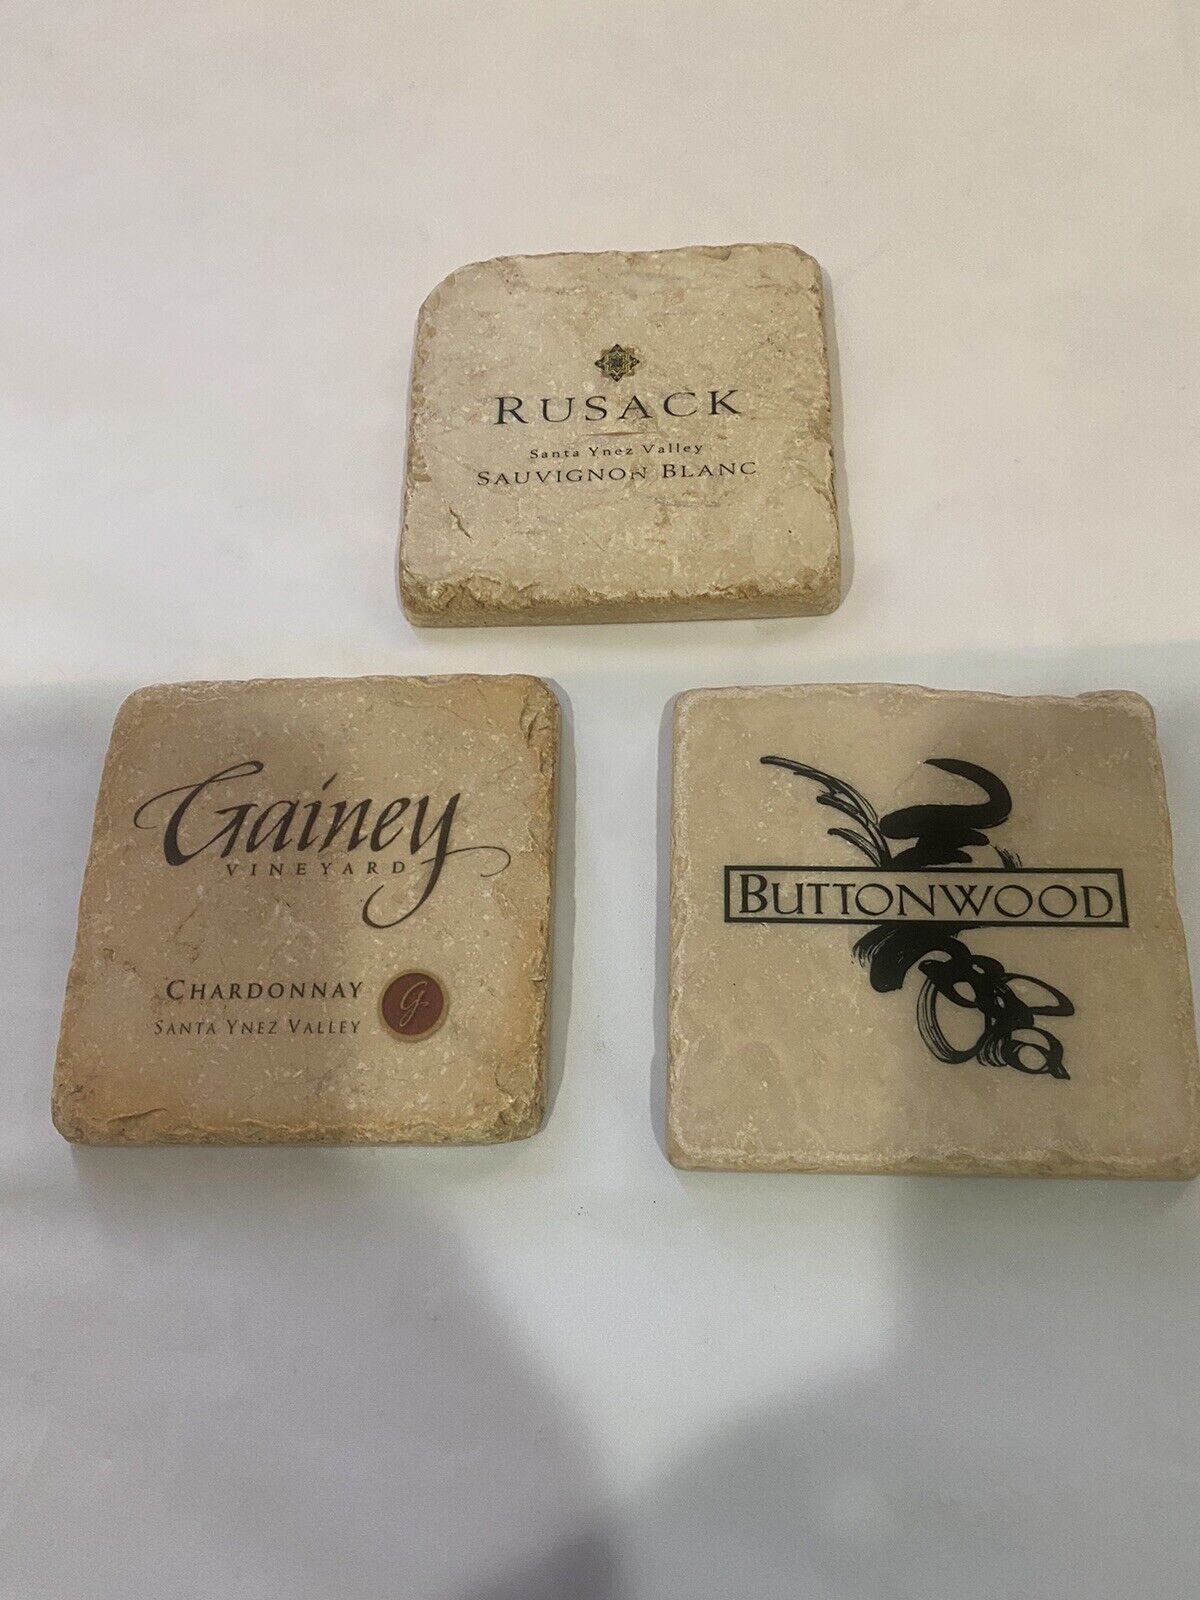 VTG 3 Pcs Tumbled Marble-Artandstone Coasters, 4”x4”, Winery Theme. Pre-Owned.